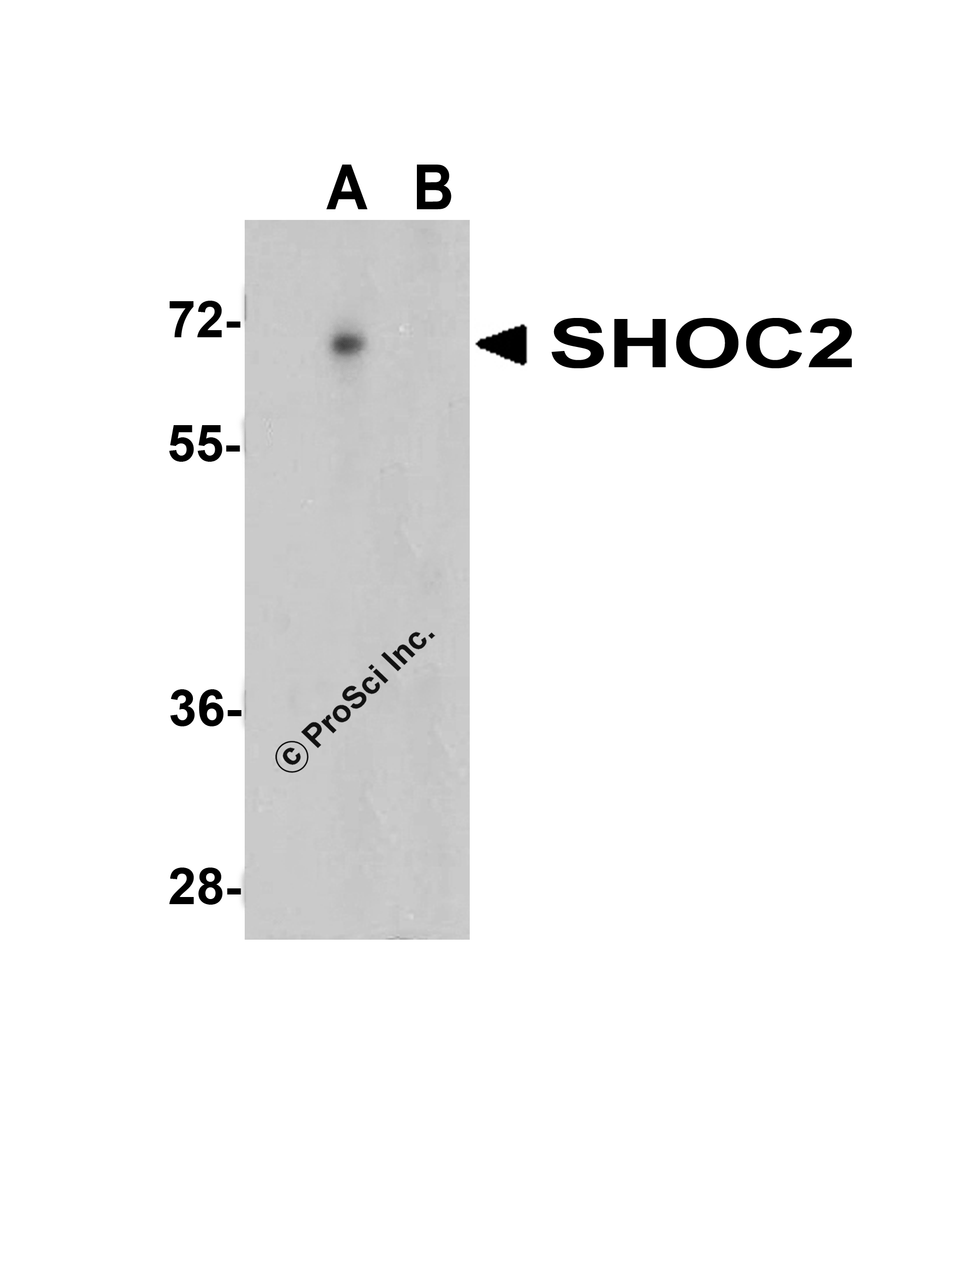 Western blot analysis of SHOC2 in Jurkat cell lysate with SHOC2 antibody at 1 &#956;g/mL in (A) the absence and (B) the presence of blocking peptide